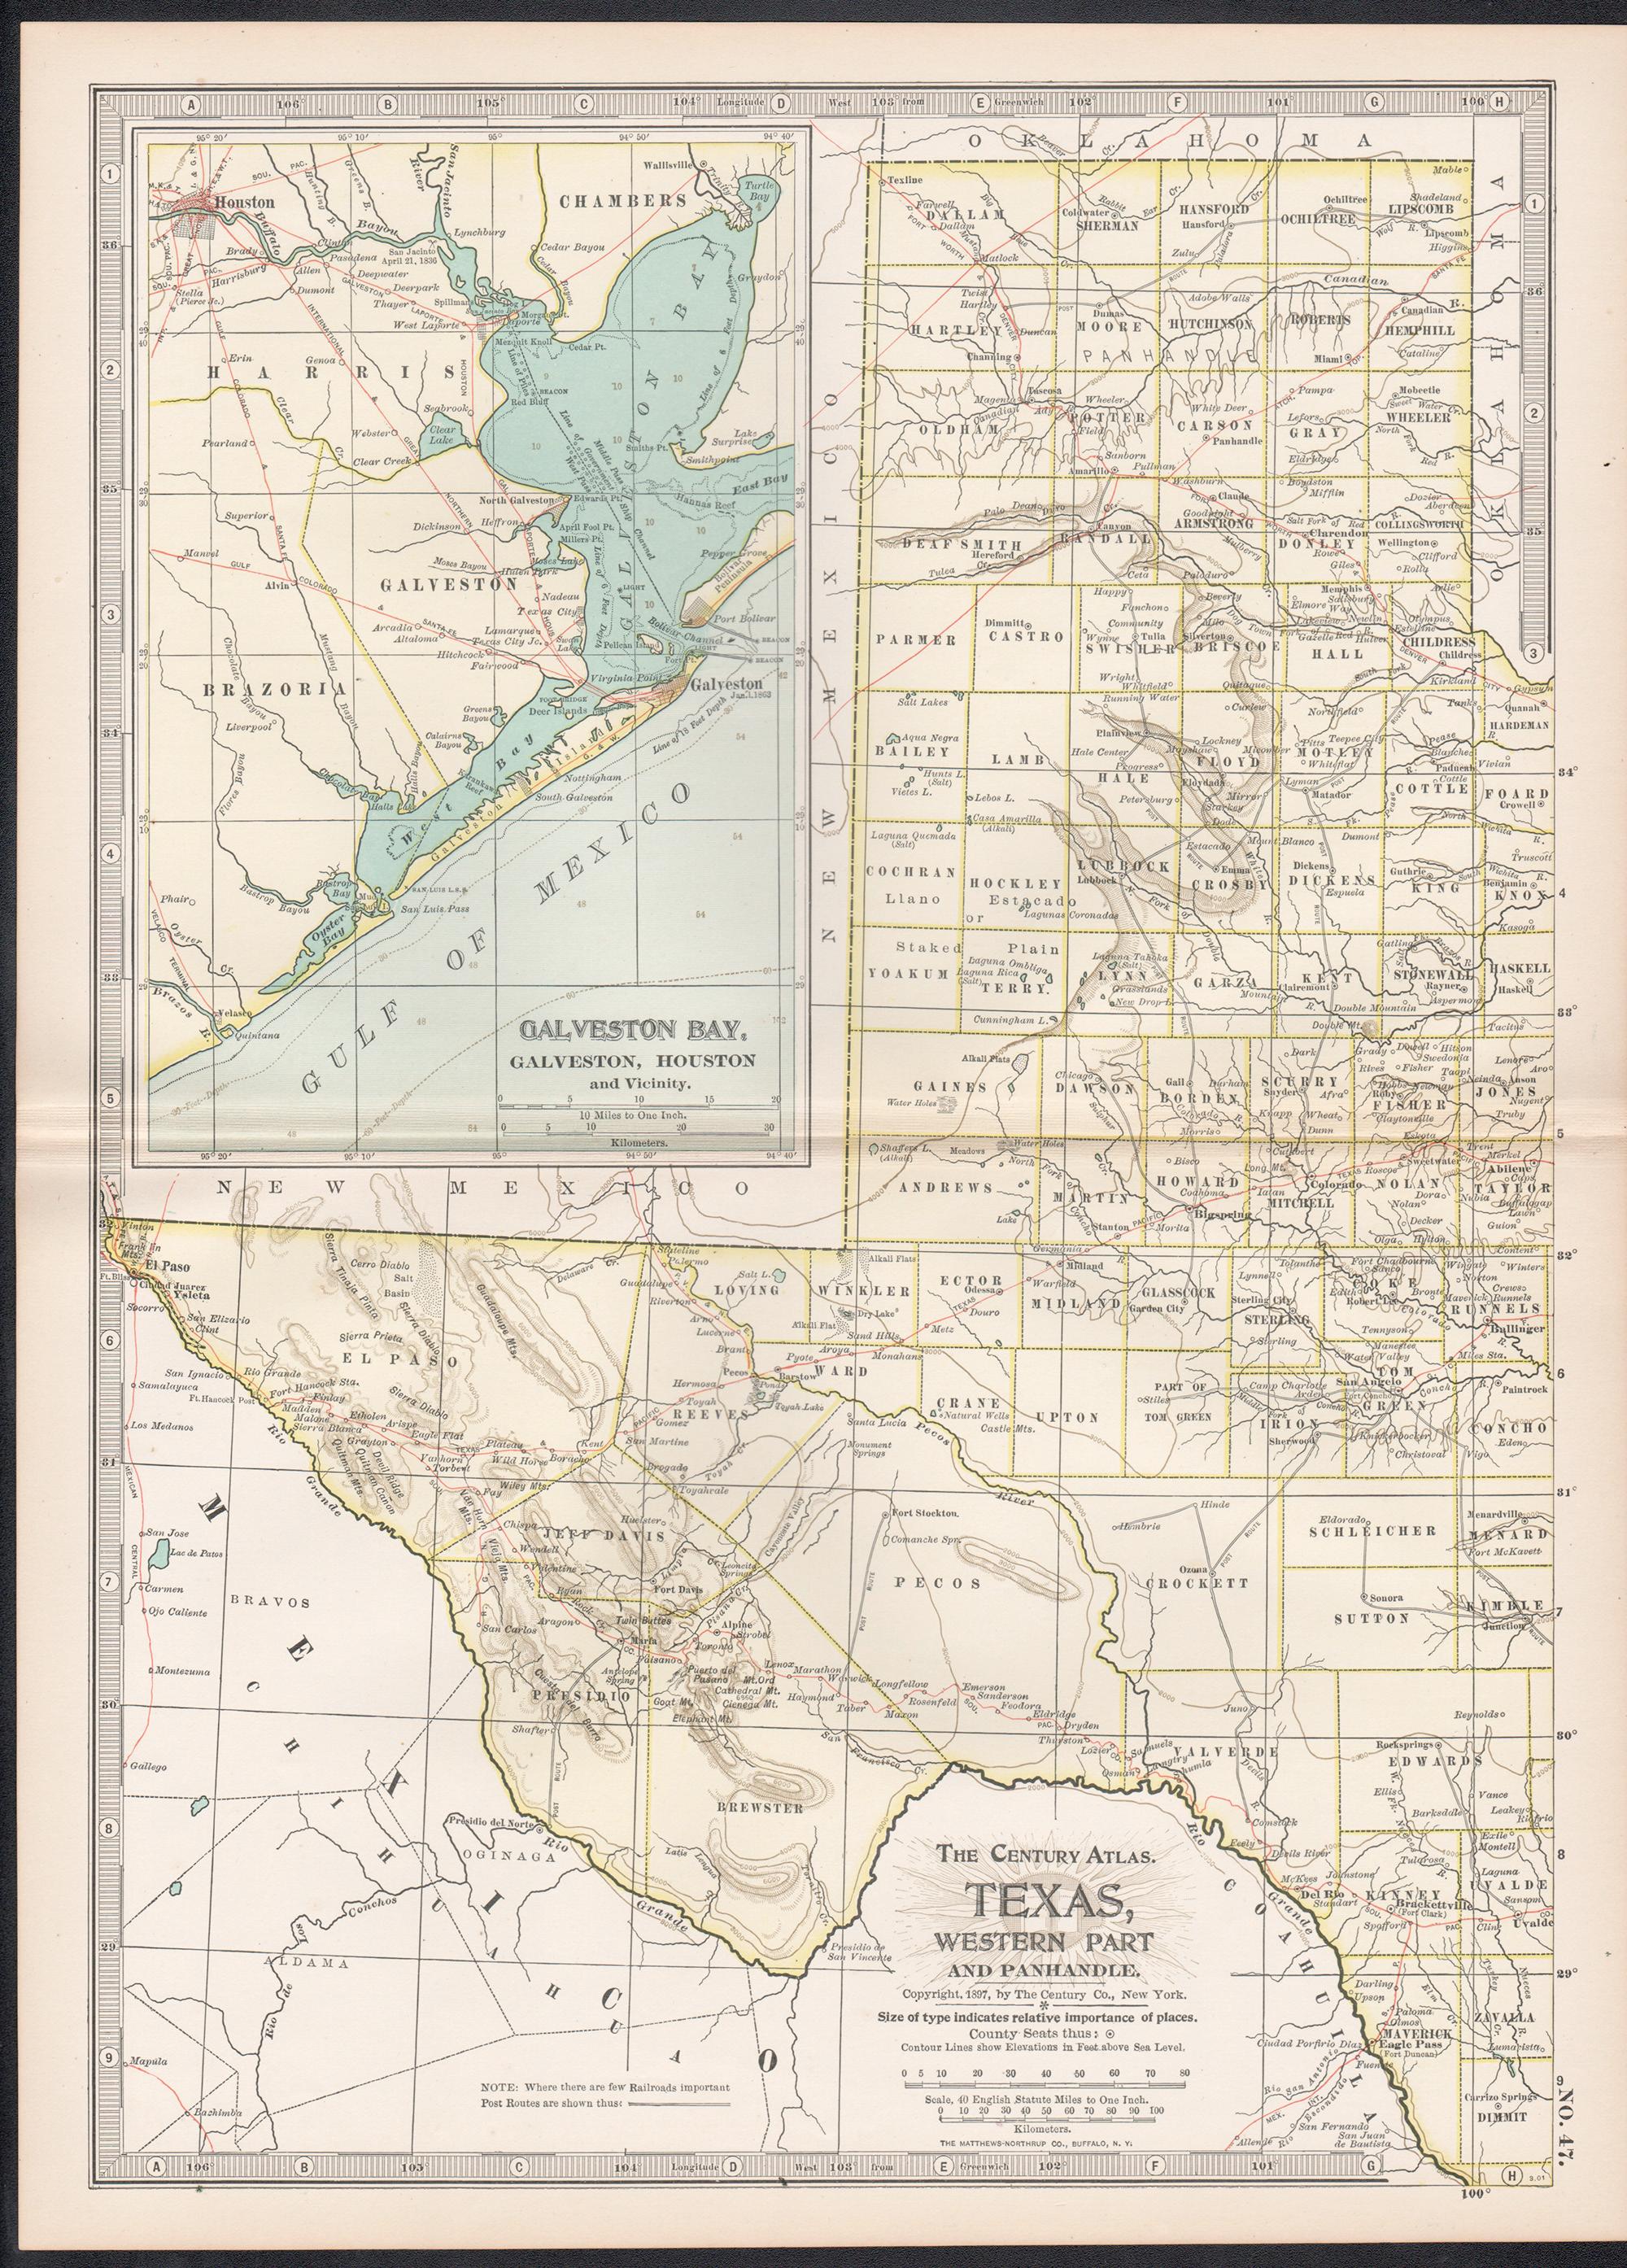 Texas, Western Part. USA. Century Atlas state antique vintage map - Print by Unknown